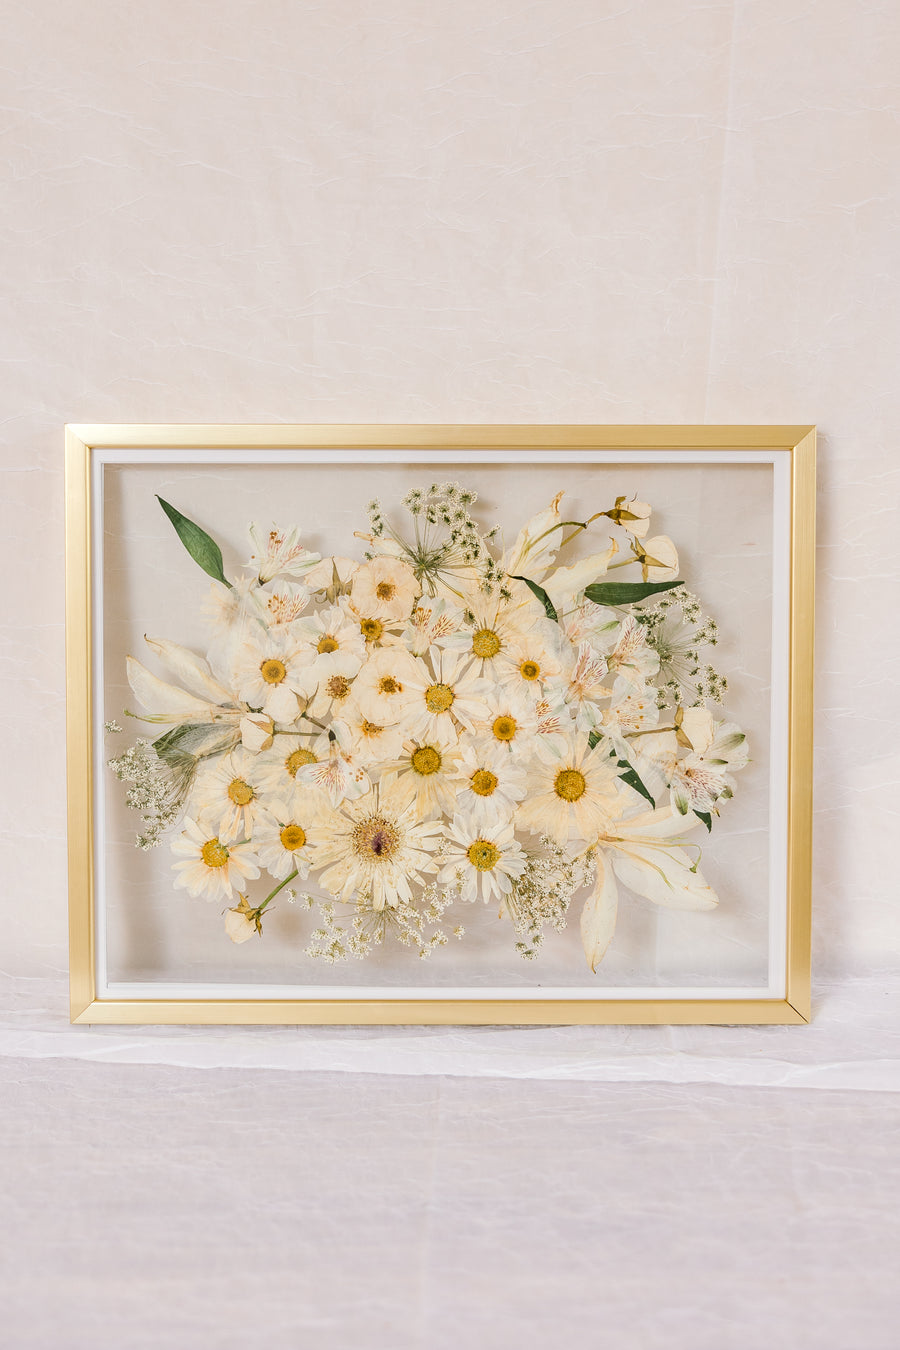 An all white bouquet of flowers pressed into a glass floating frame surrounded by gold wood.